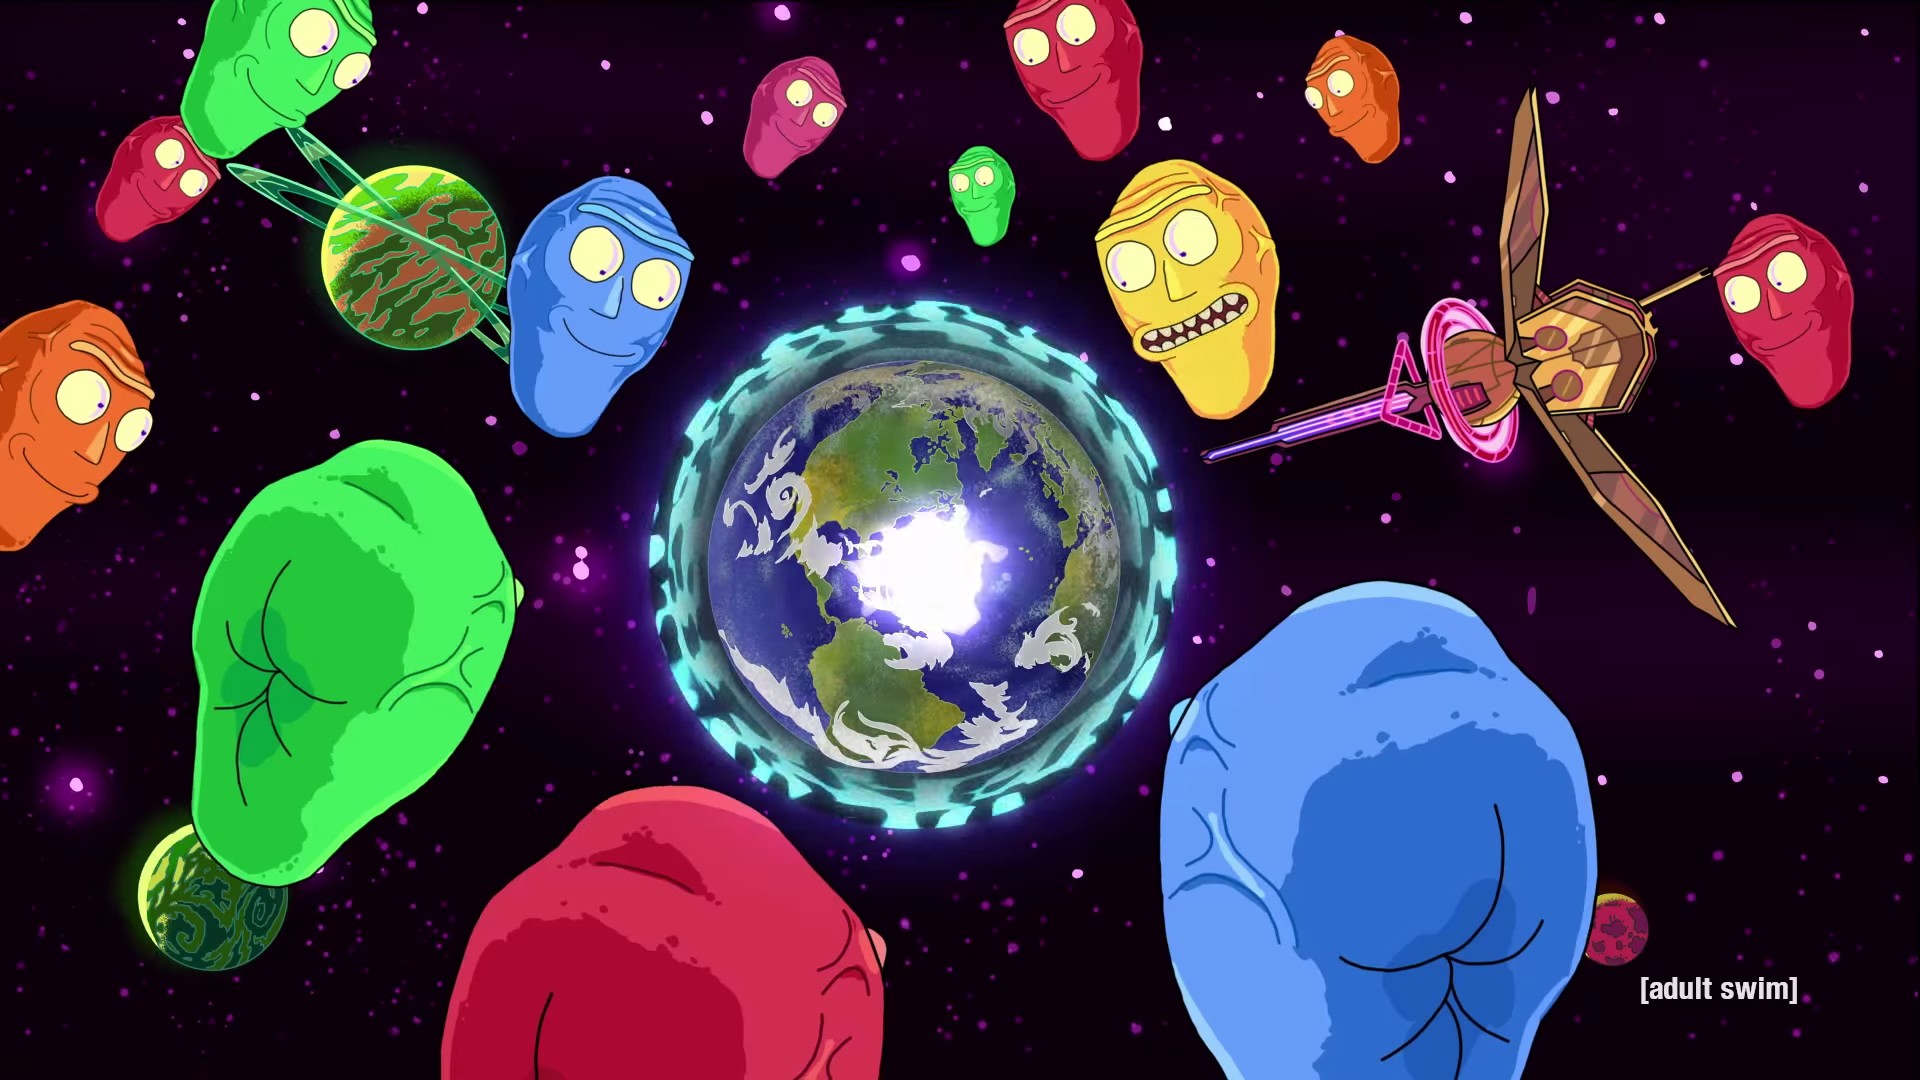 Rick and Morty wallpaper 1920x1080 ·① Download free